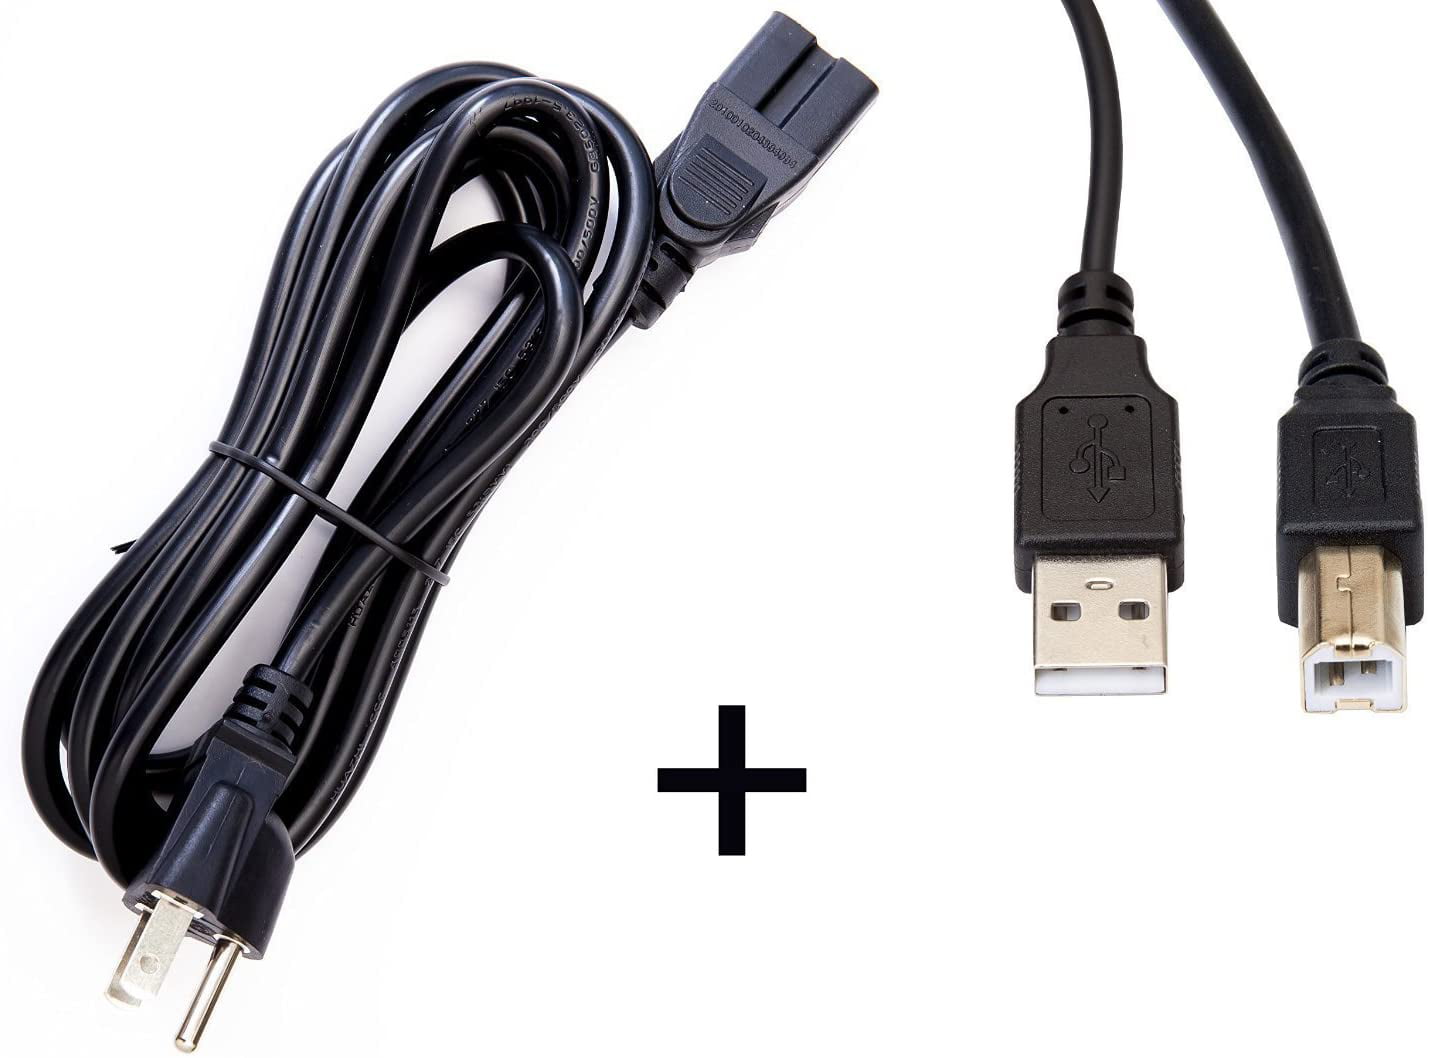 OMNIHIL 8 Feet Long High Speed USB 2.0 Cable Compatible with HP Laserjet PRO MFP M127FW